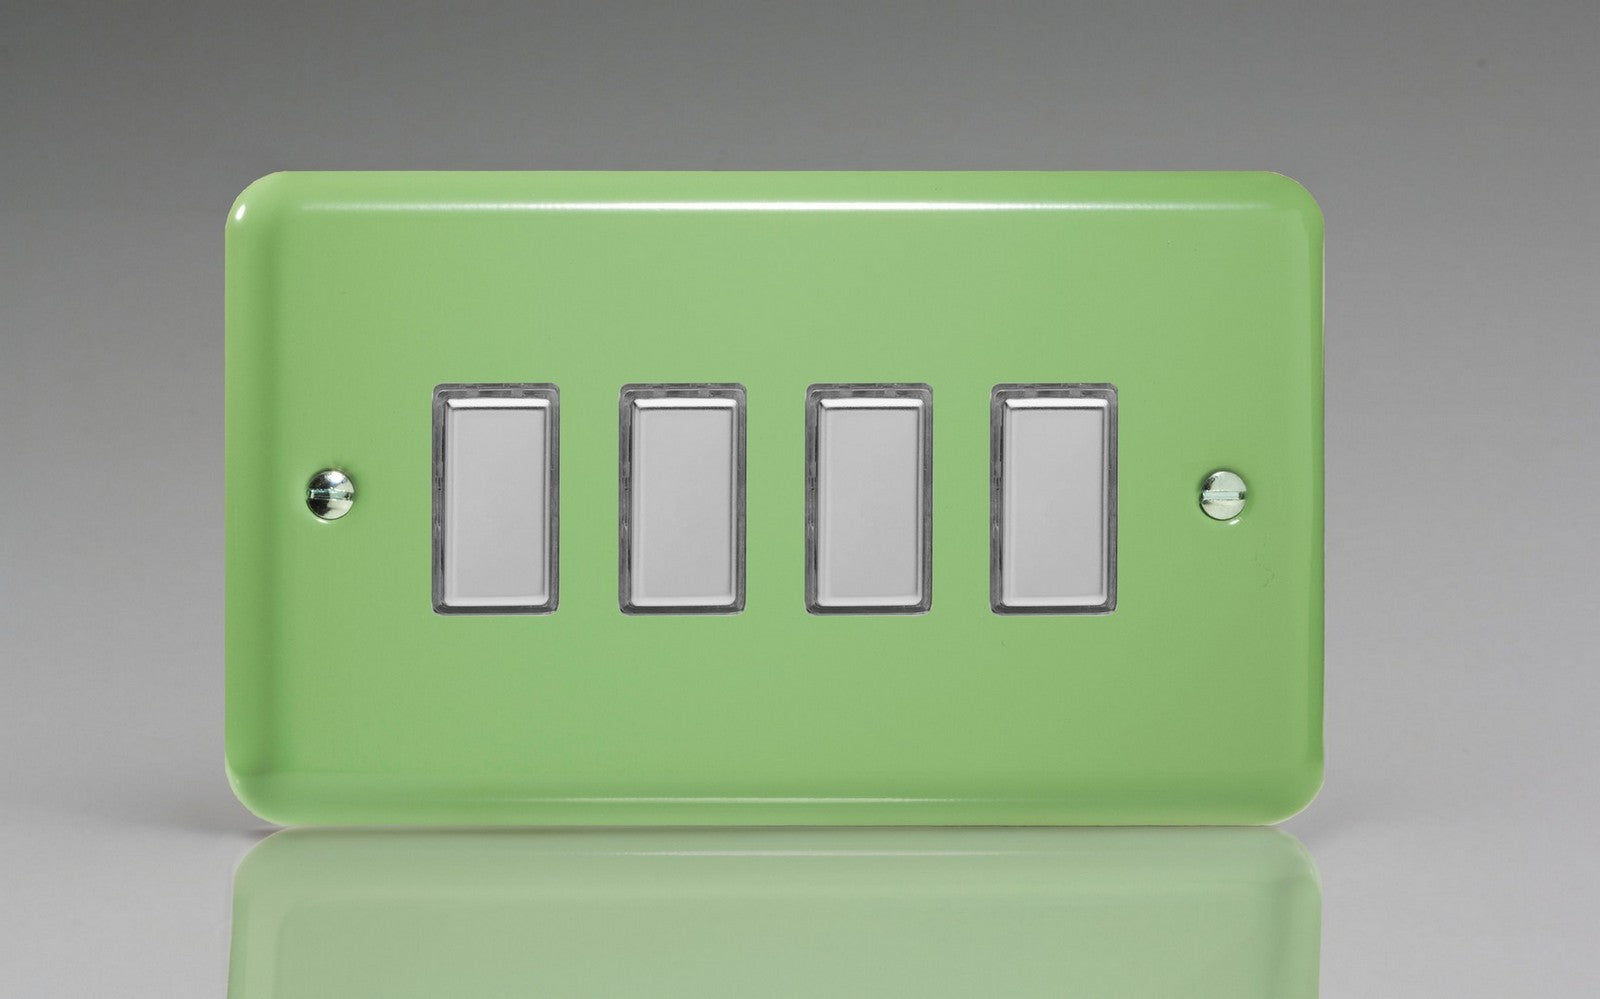 Varilight JYES004.BG Lily Beryl Green 4-Gang Tactile Touch Control Dimming Slave for use with Multi-Point Touch or Remote Master on 2-Way Circuits (Twin Plate)